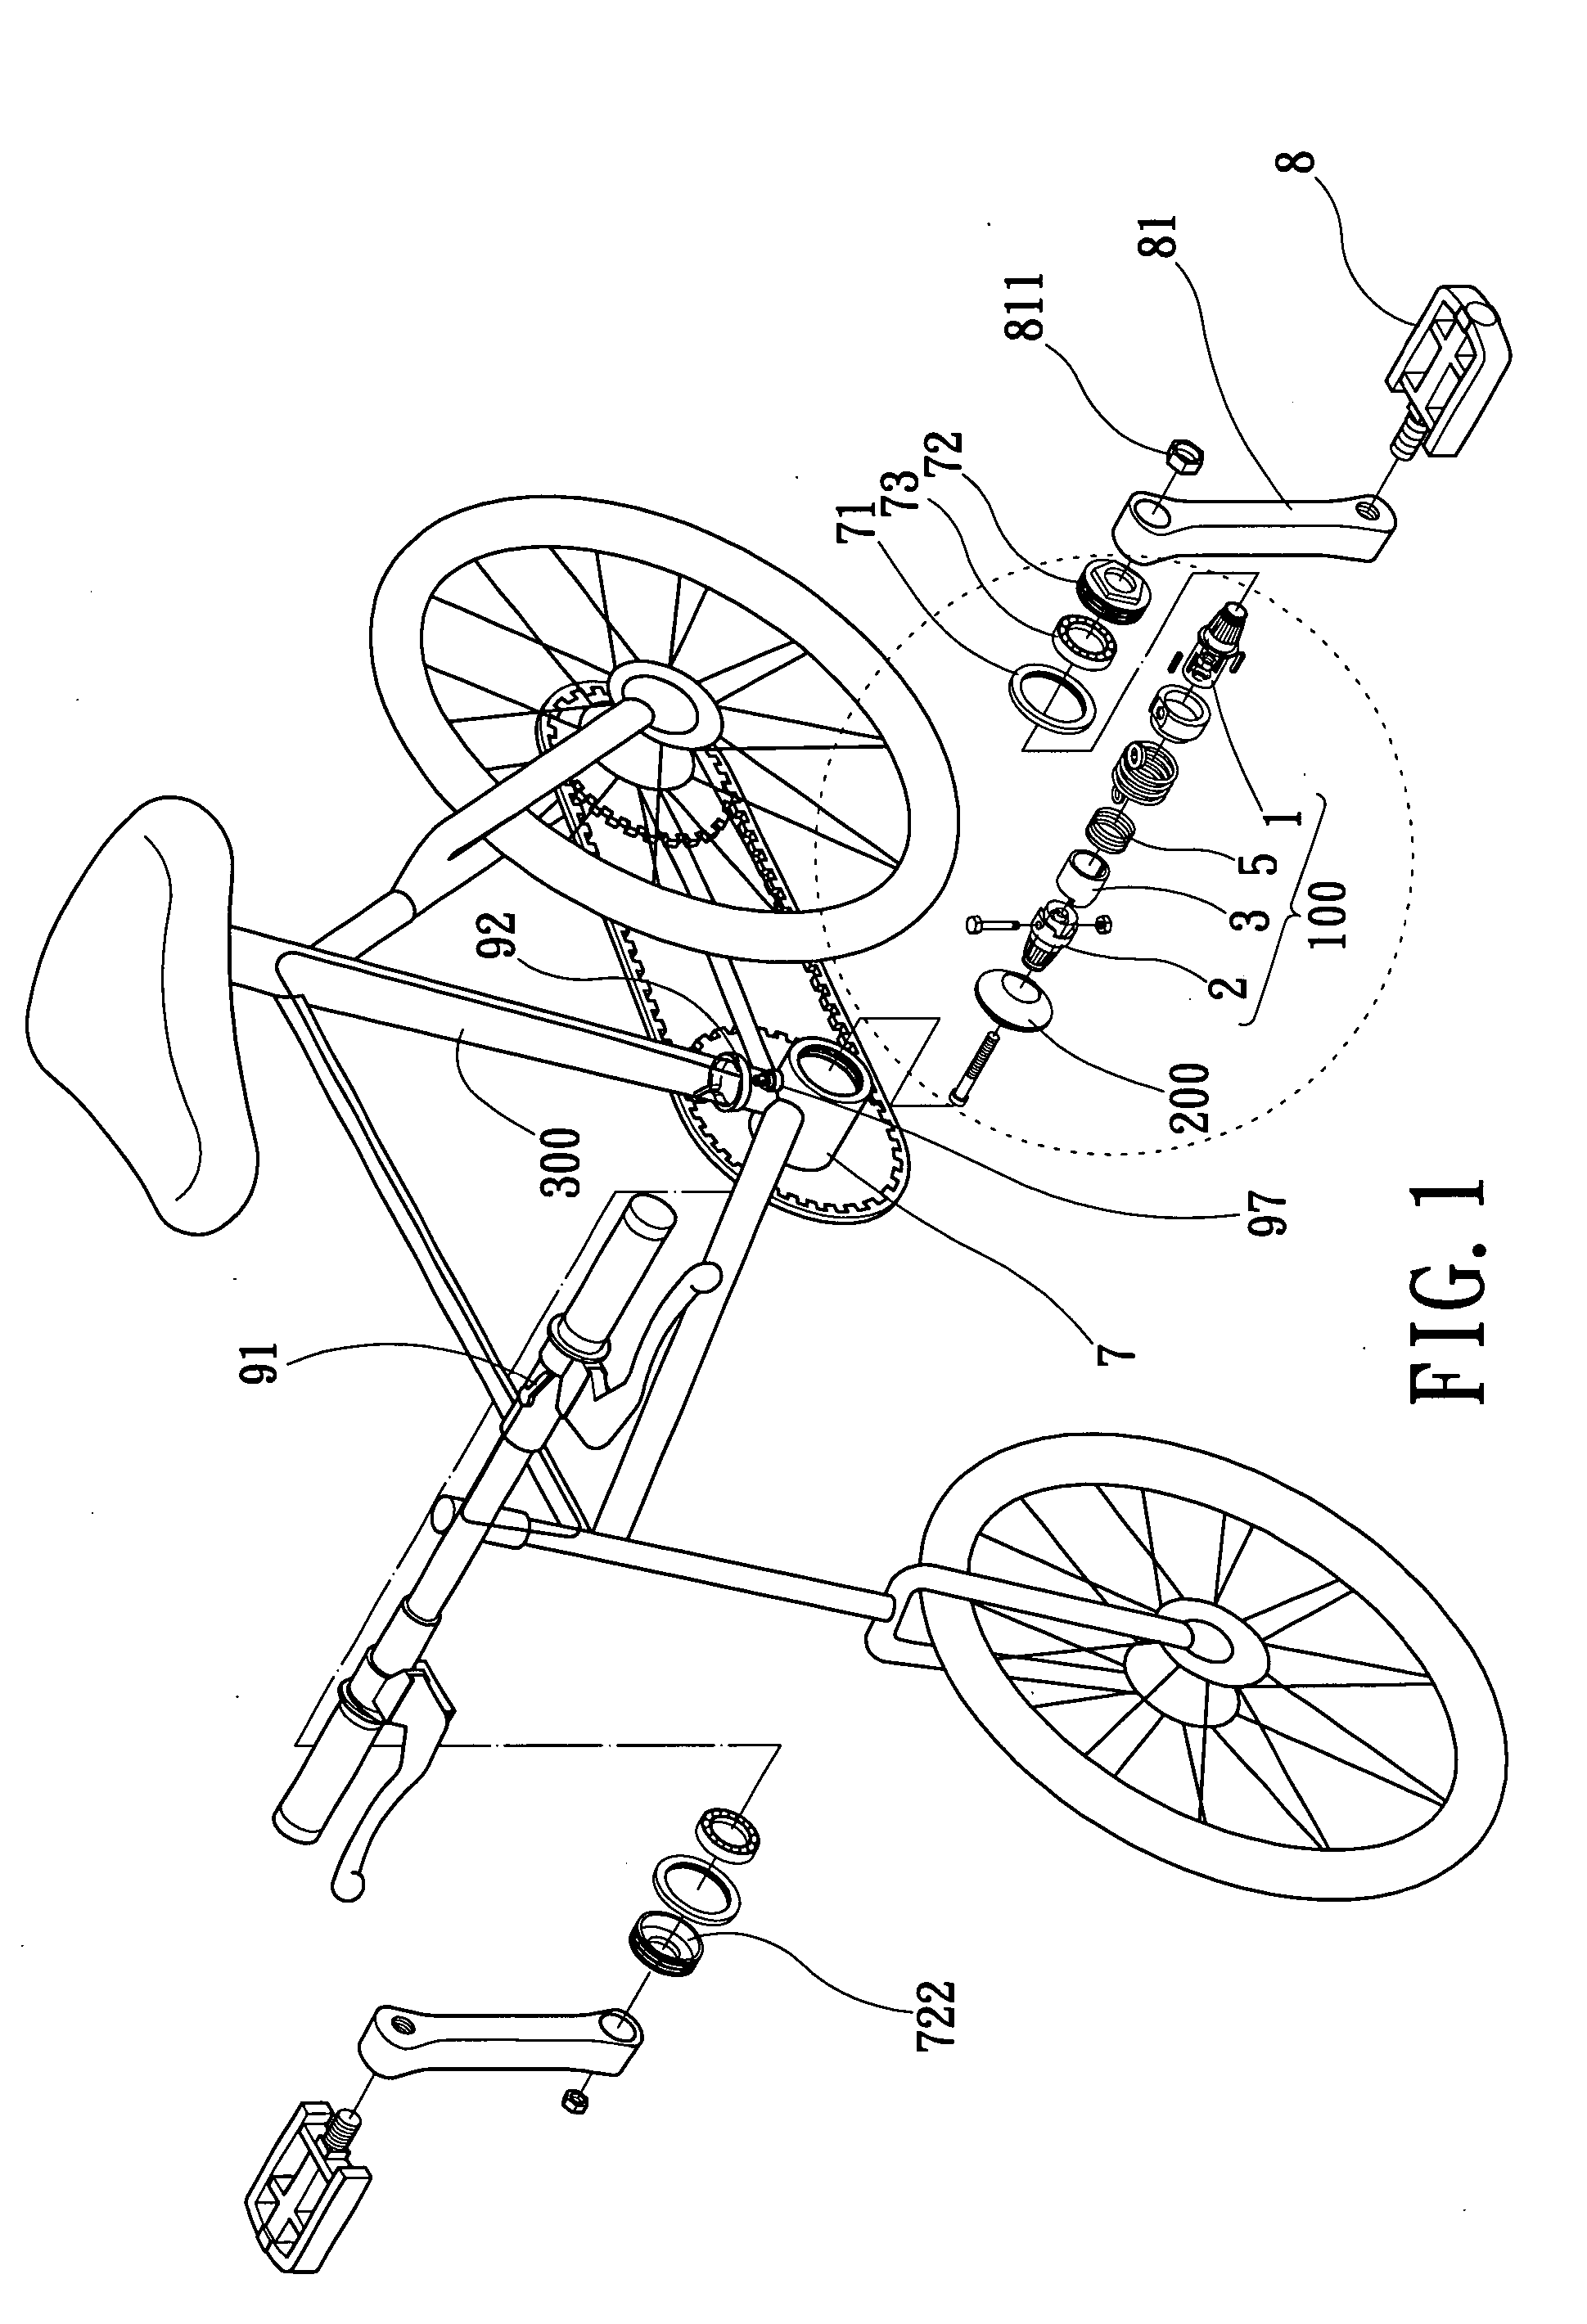 Pedal shaft structure of a bicycle having a second pedaling function